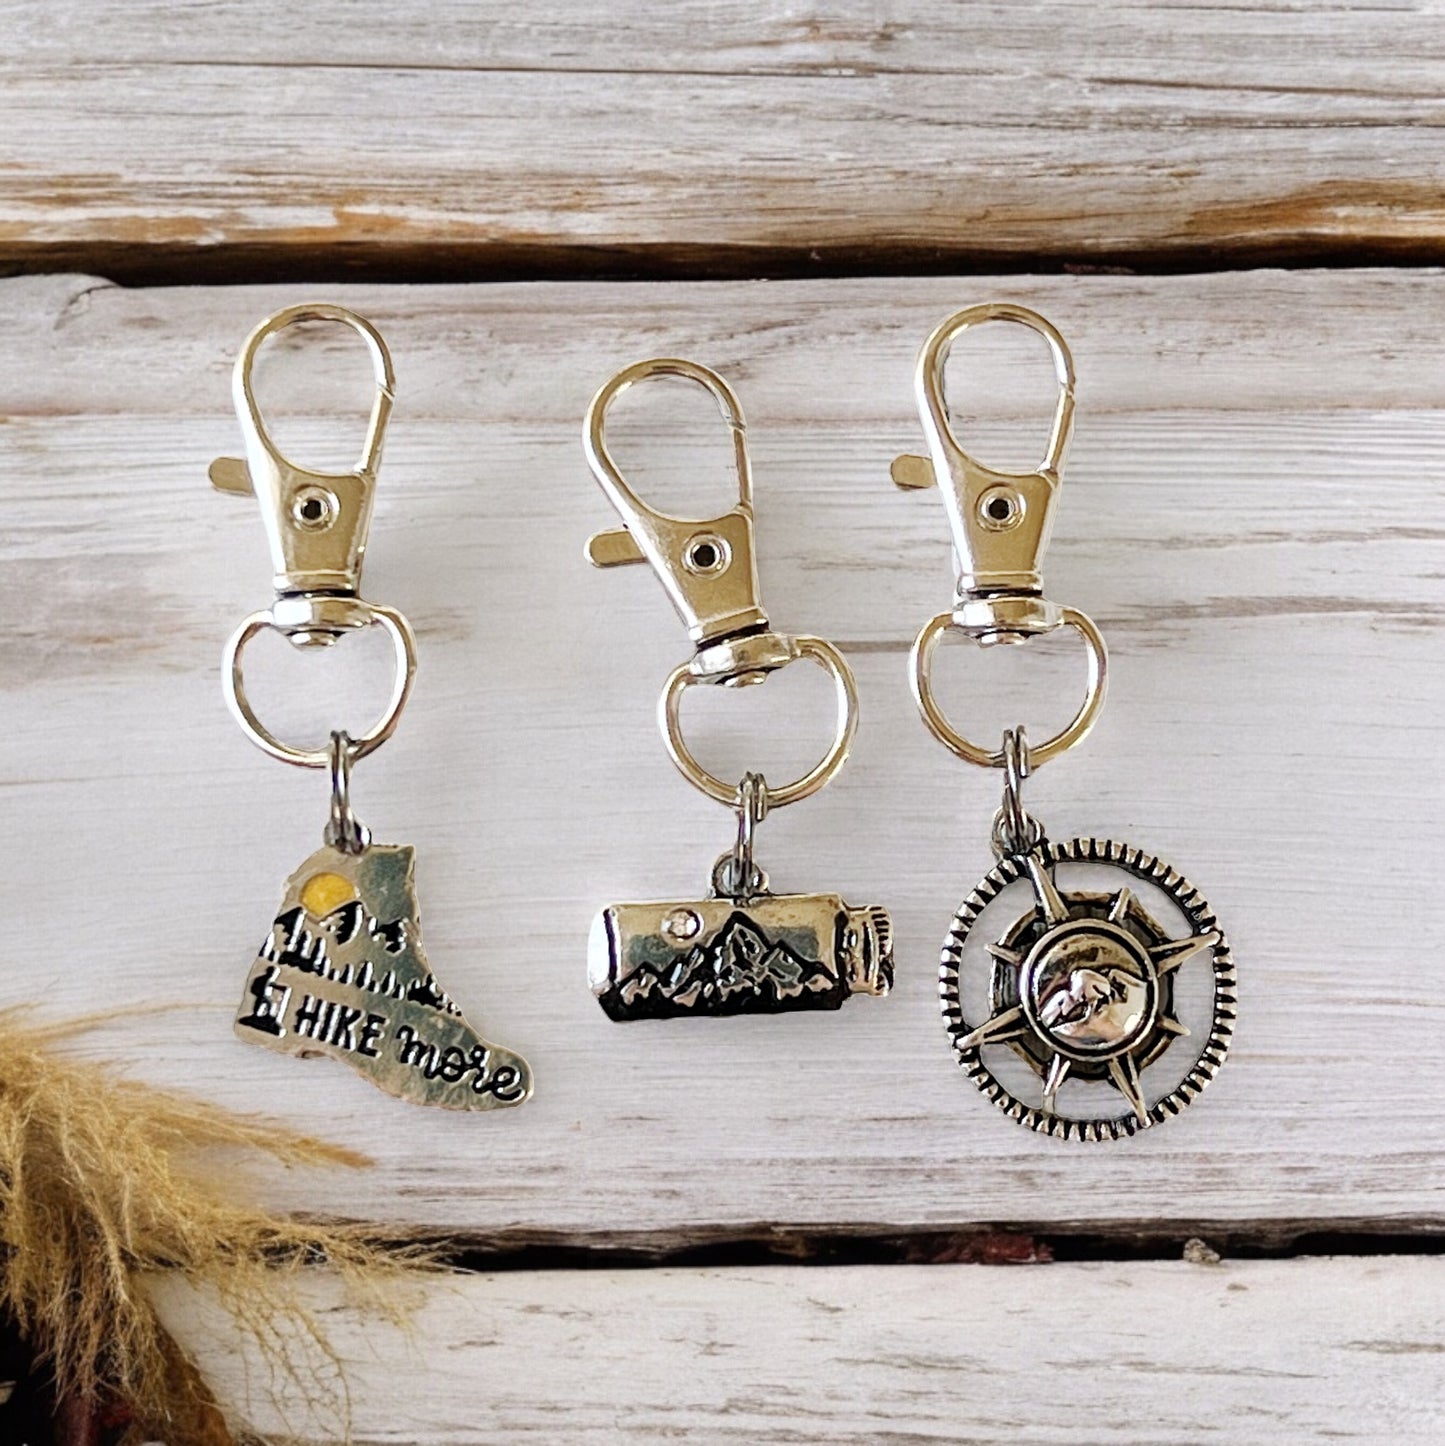 Hike More Mountains Zipper Pull Keychain Charm: Adventure-Inspired Purse Accessories